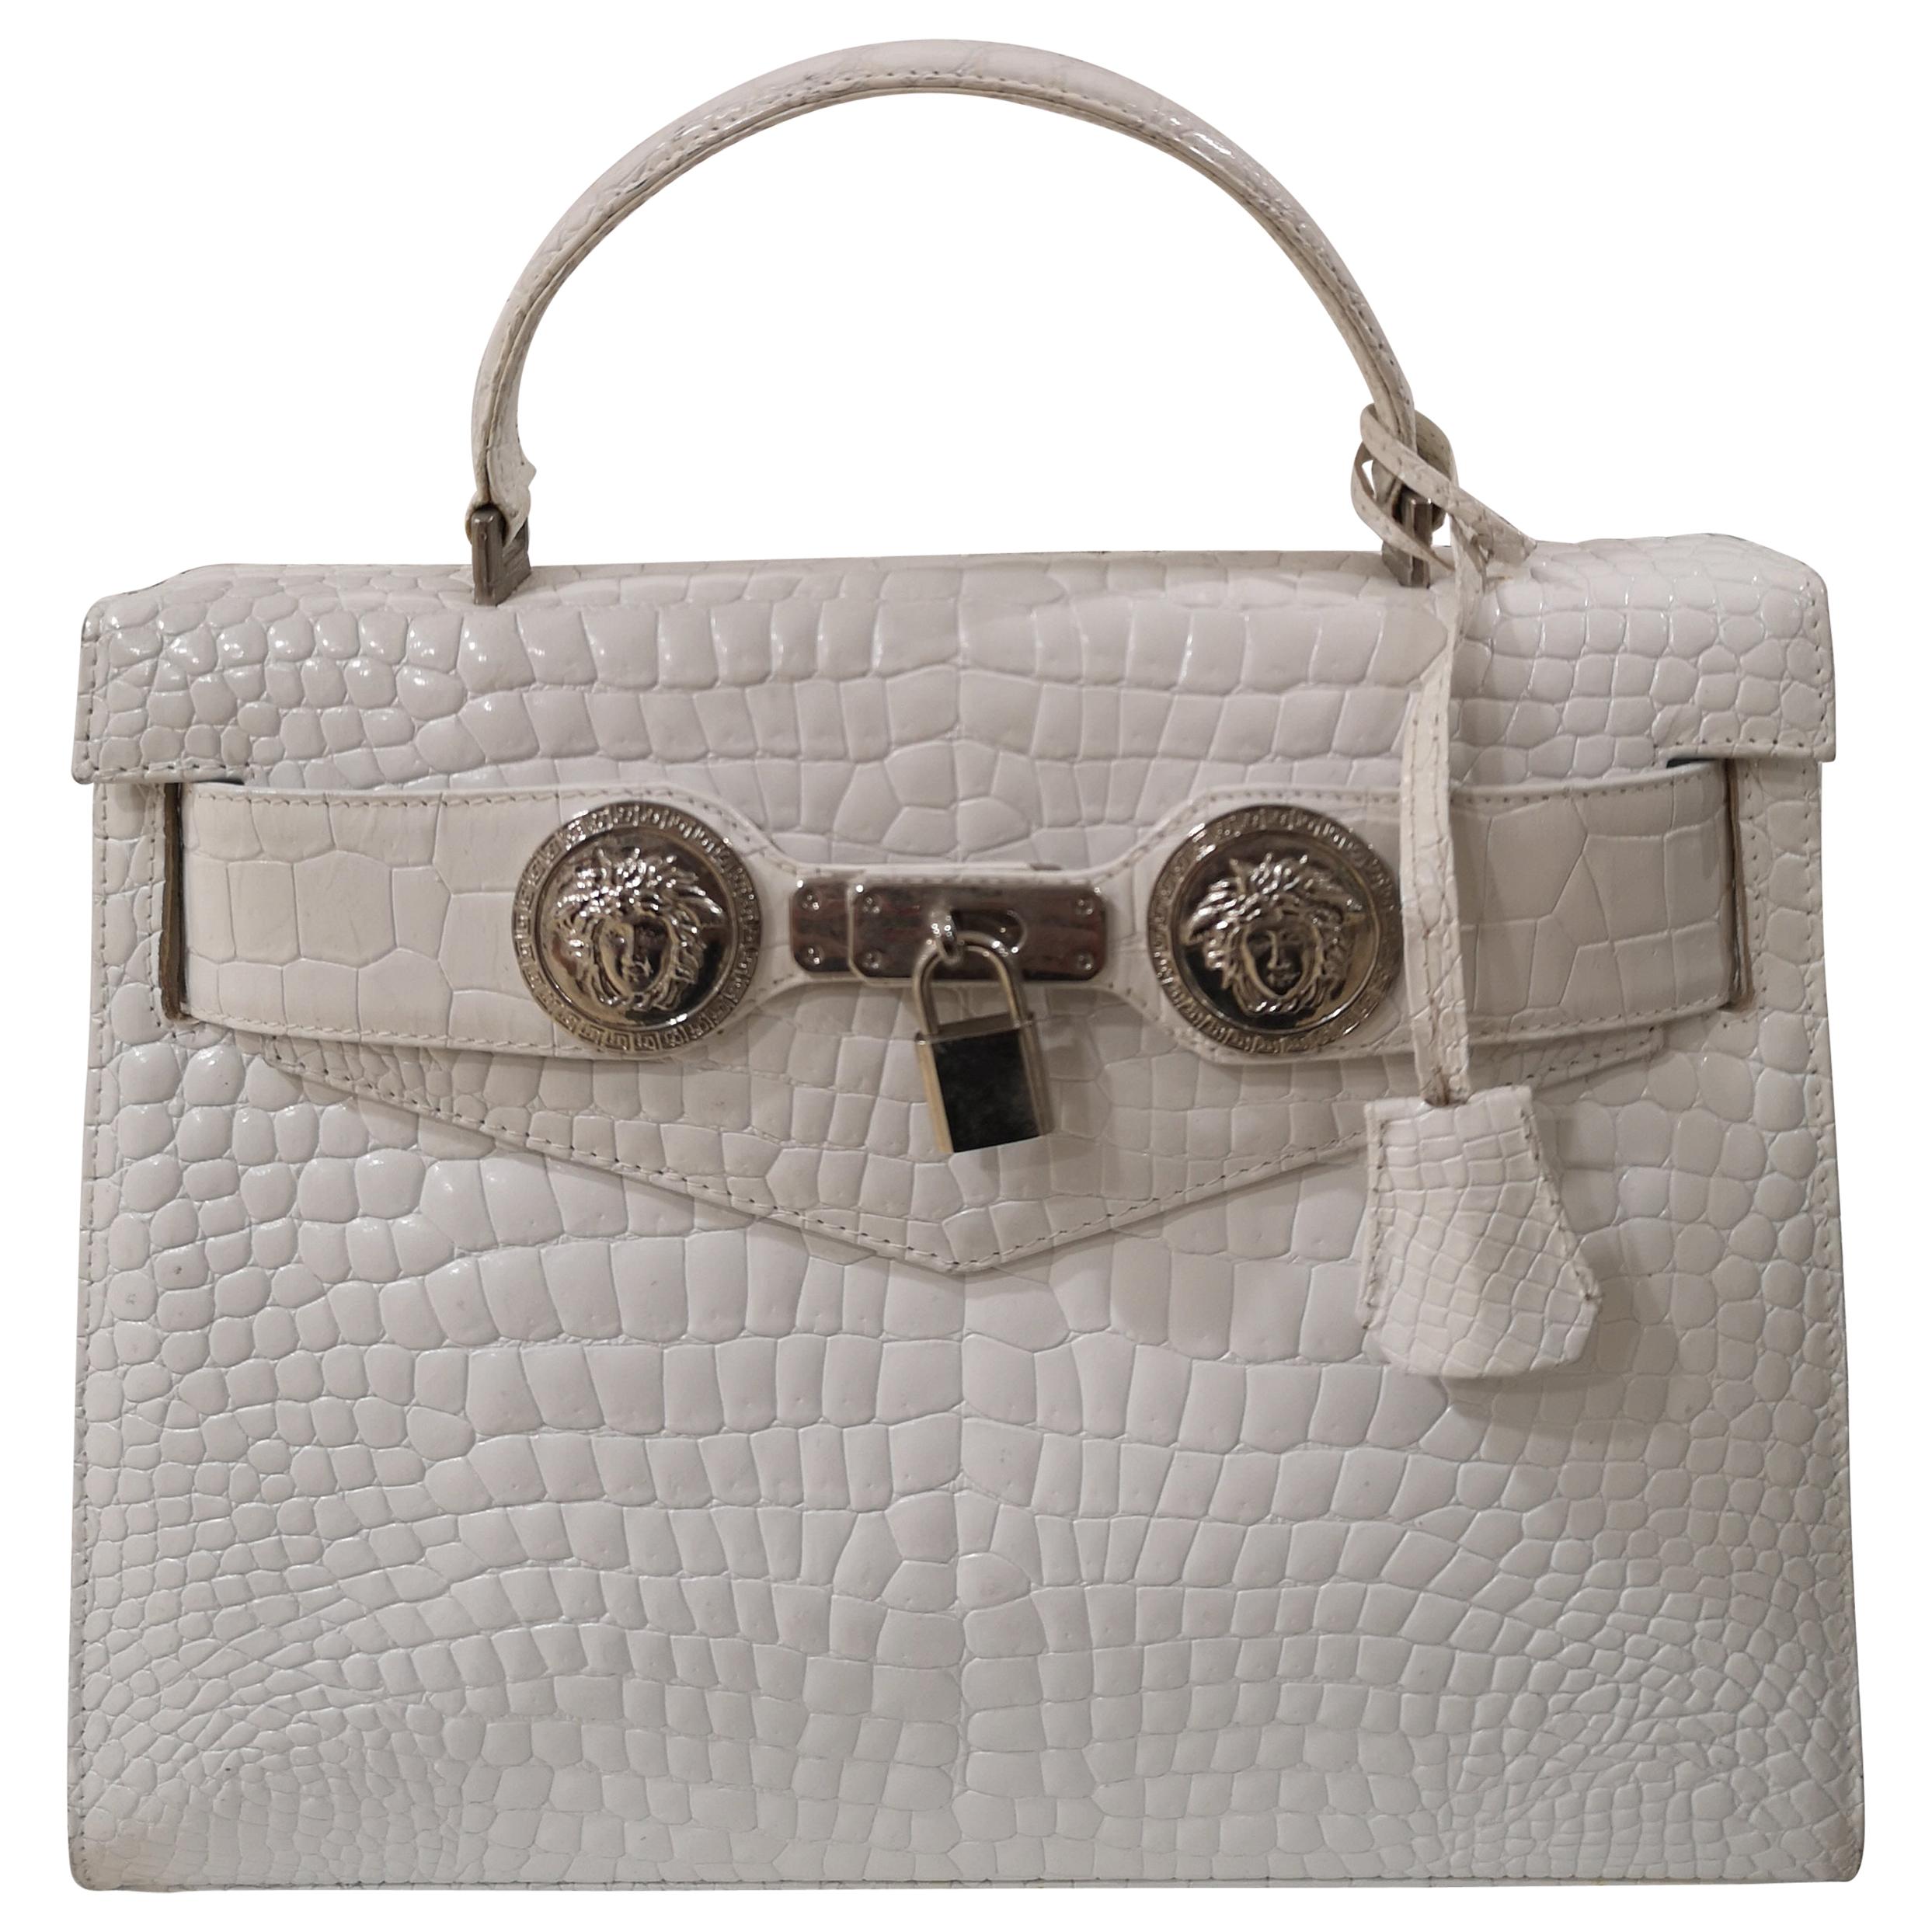 Gianni Versace white leather cocco handle shoulder bag